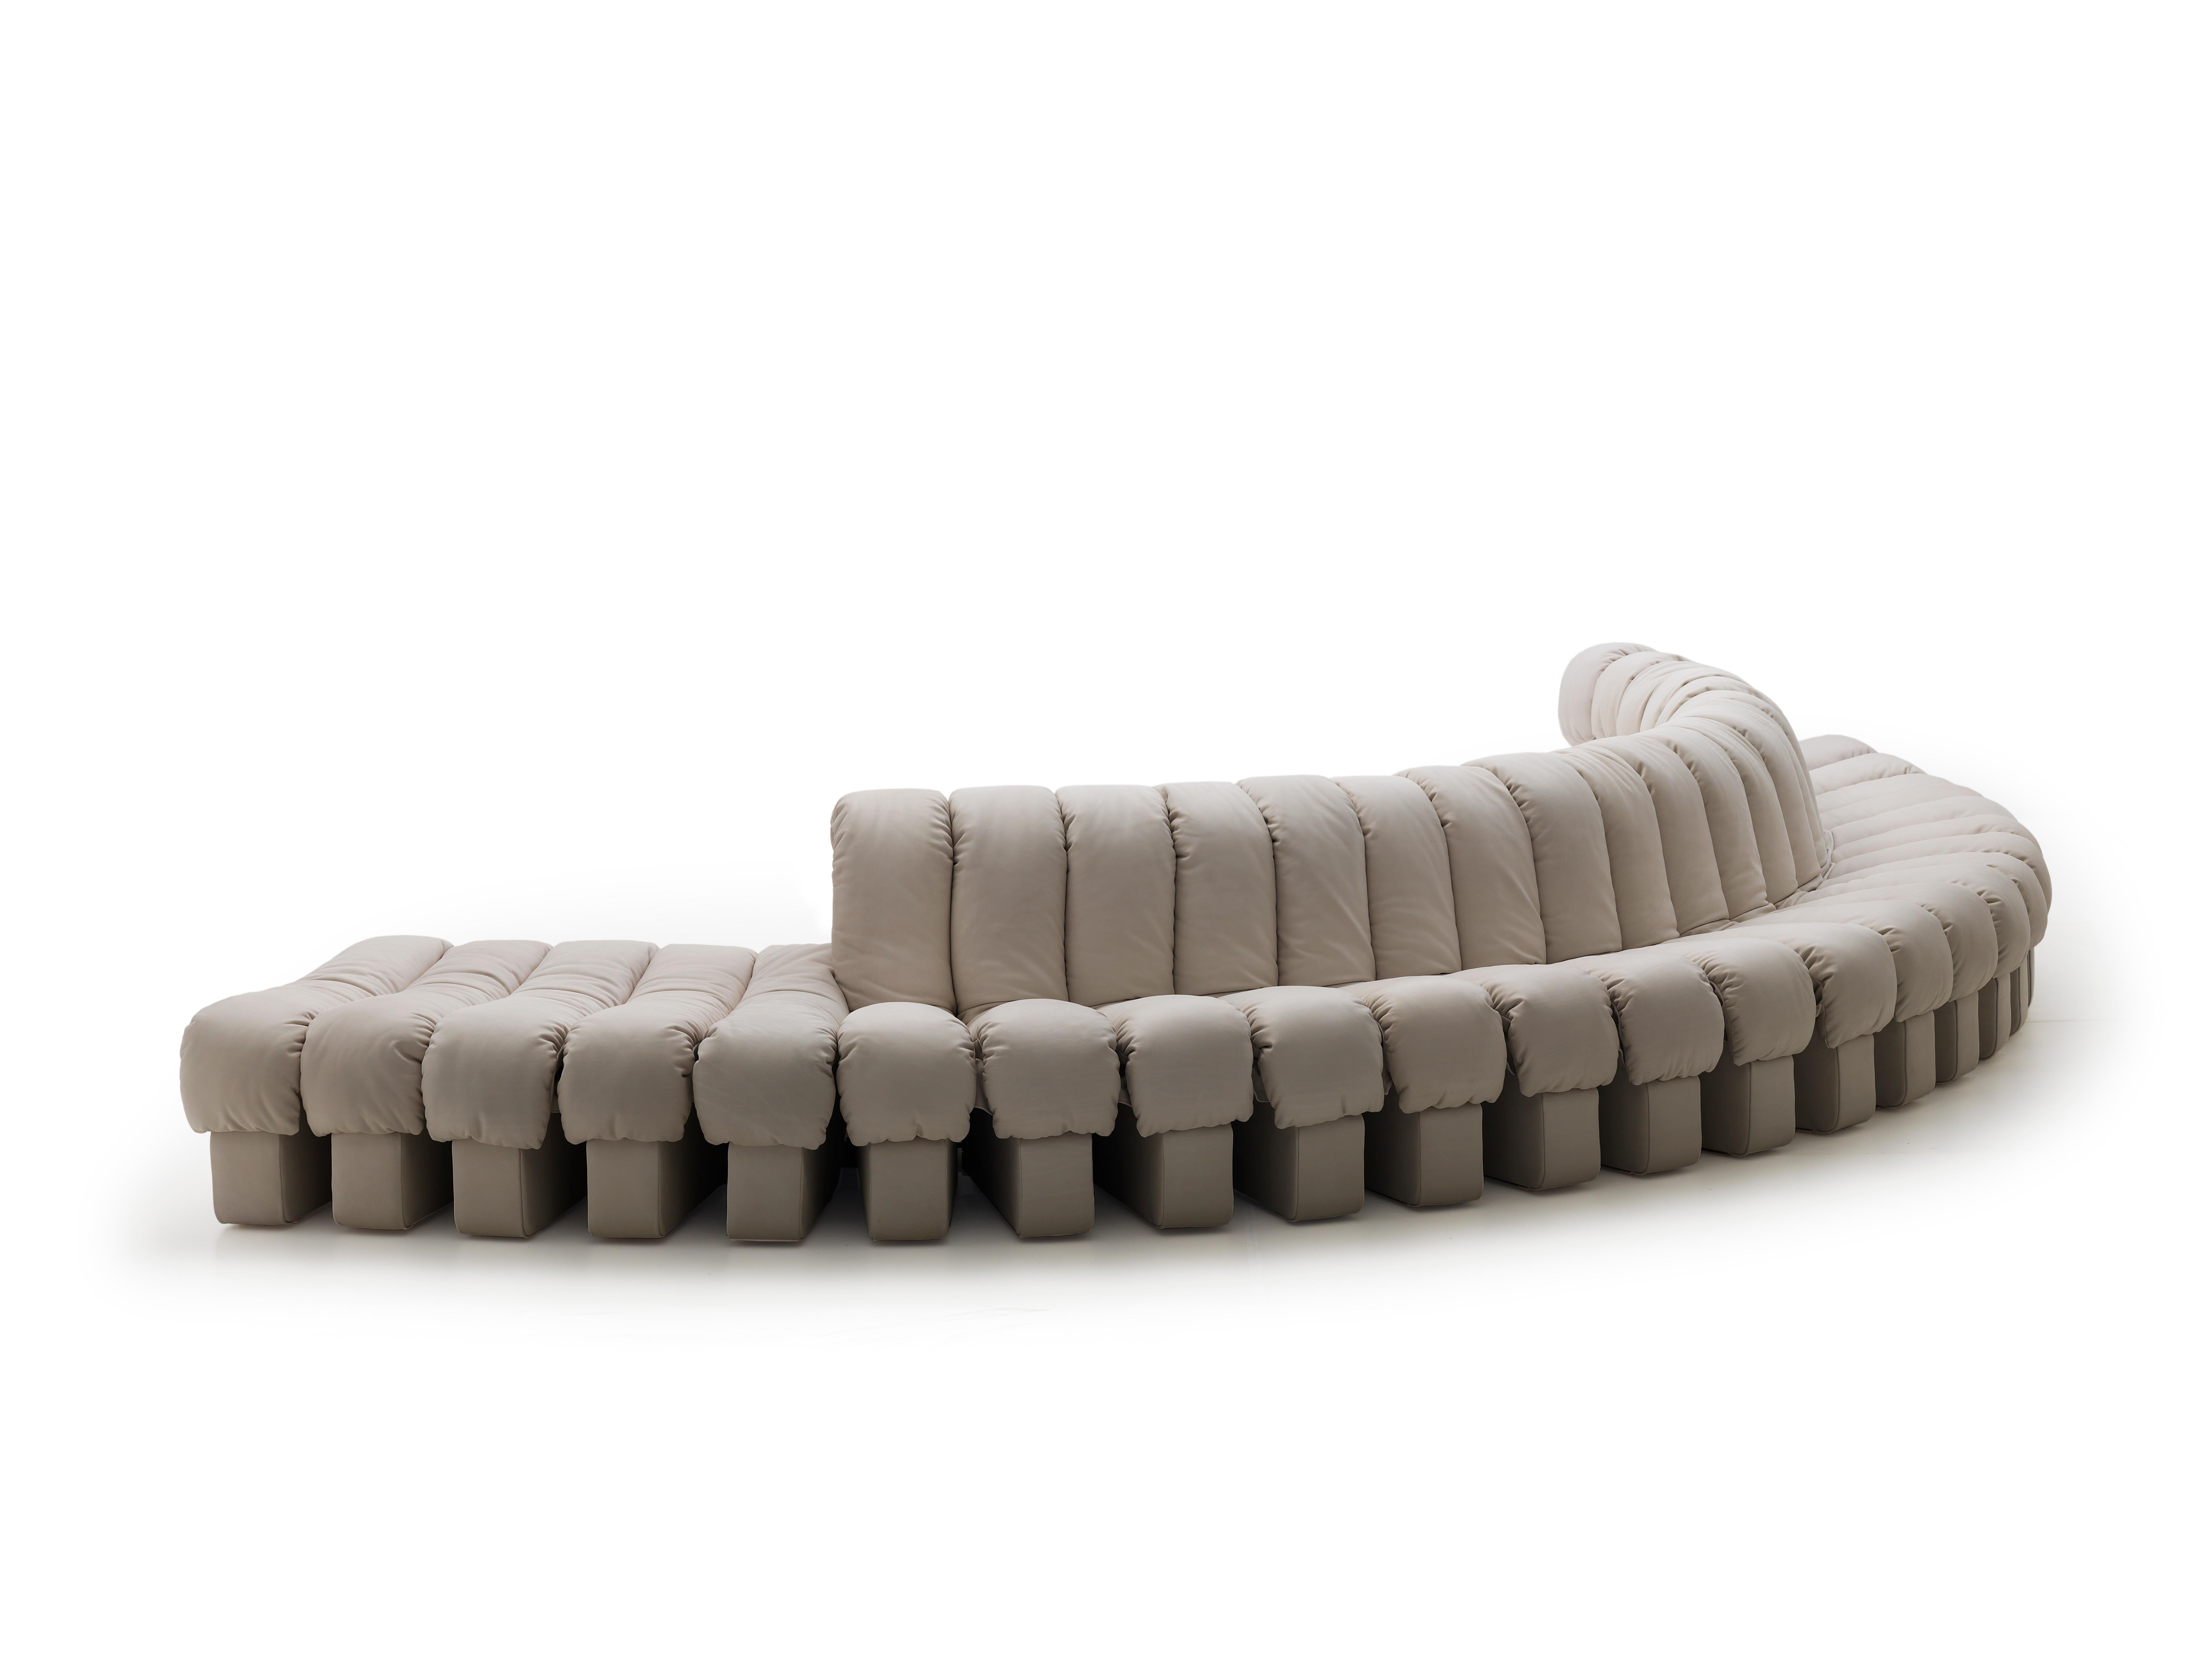 Hand-Crafted De Sede DS 600 'Snake' Seating Landscape with 80 Elements in Nappa Leather  For Sale